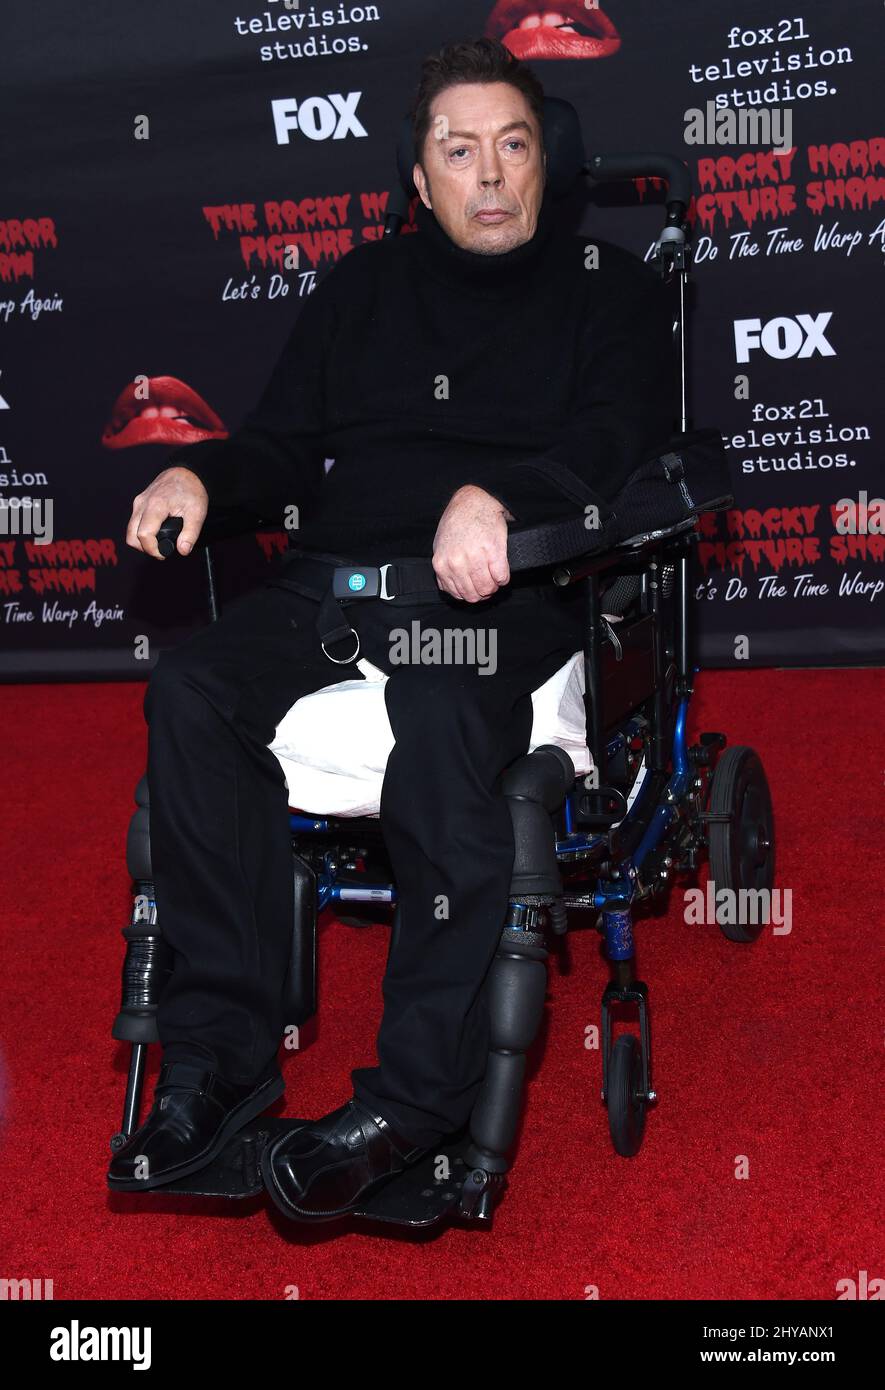 Tim Curry attending the Rocky Horror Picture Show: Let's Do The Time Warp Again Premiere held at The Roxy, in Los Angeles, California. Stock Photo